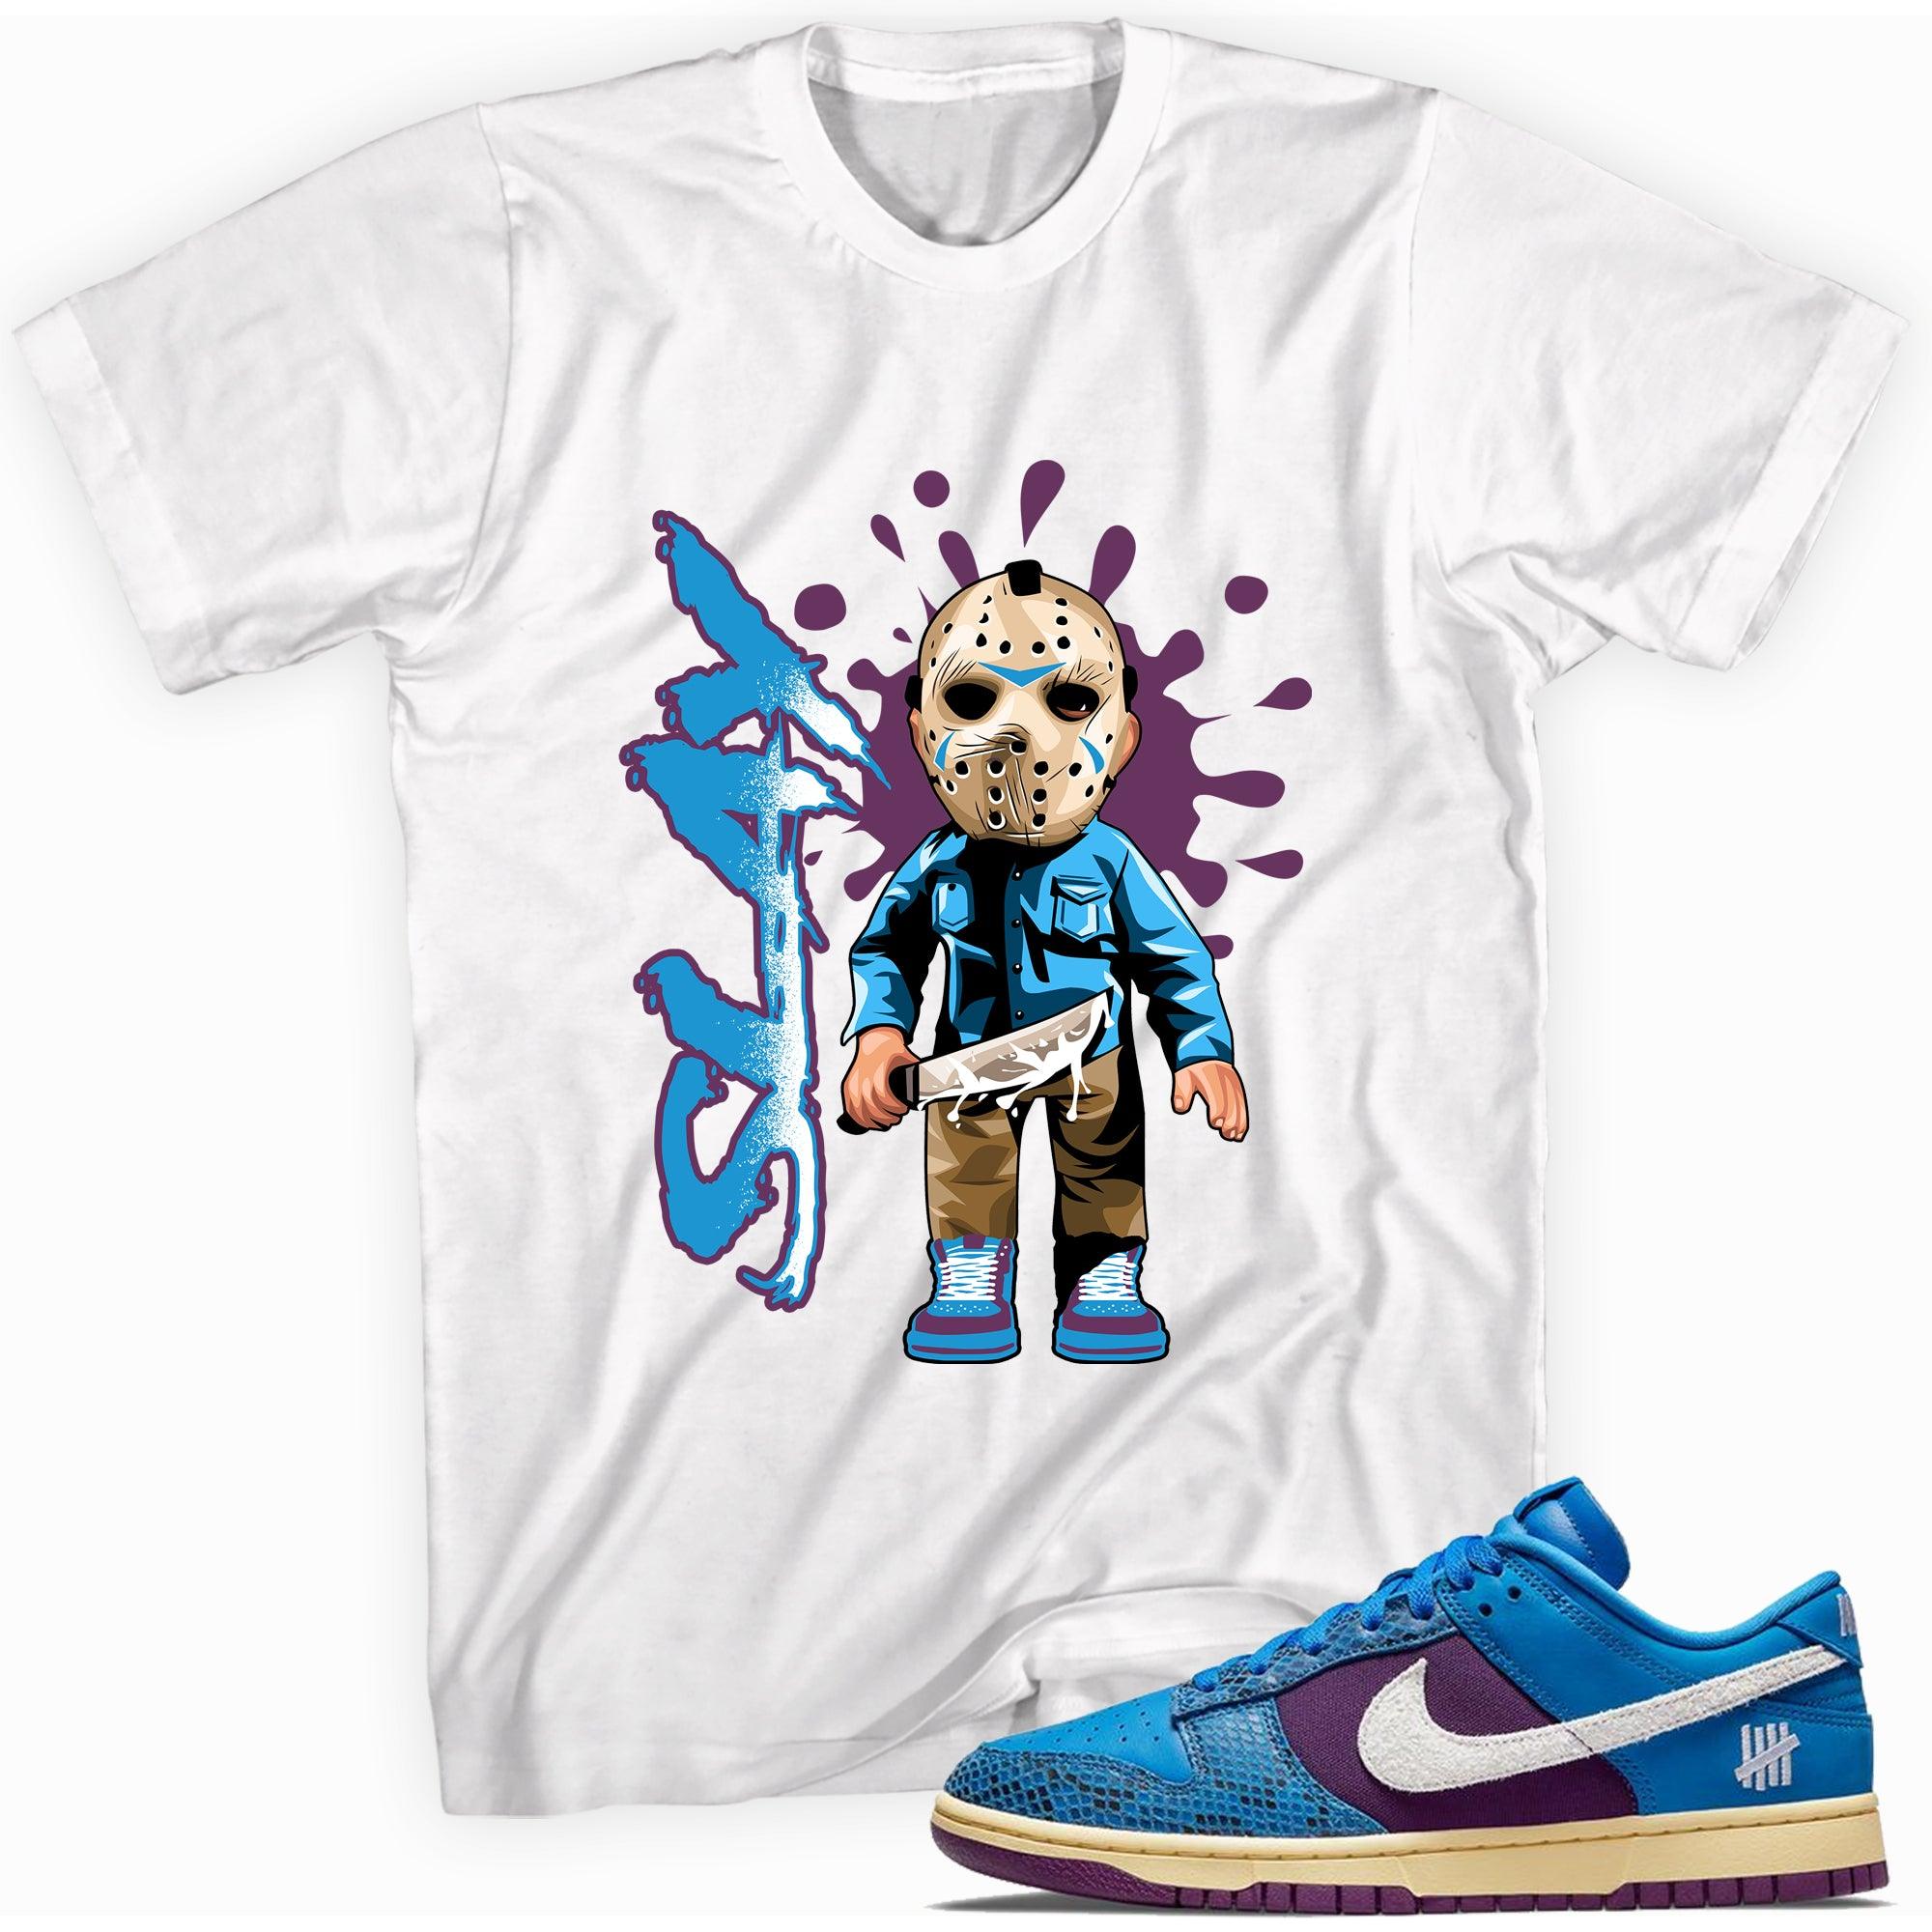 Nike Dunk Low Undefeated 5 On It Dunk VS AF1 Shirt - Slay - Sneaker Shirts Outlet